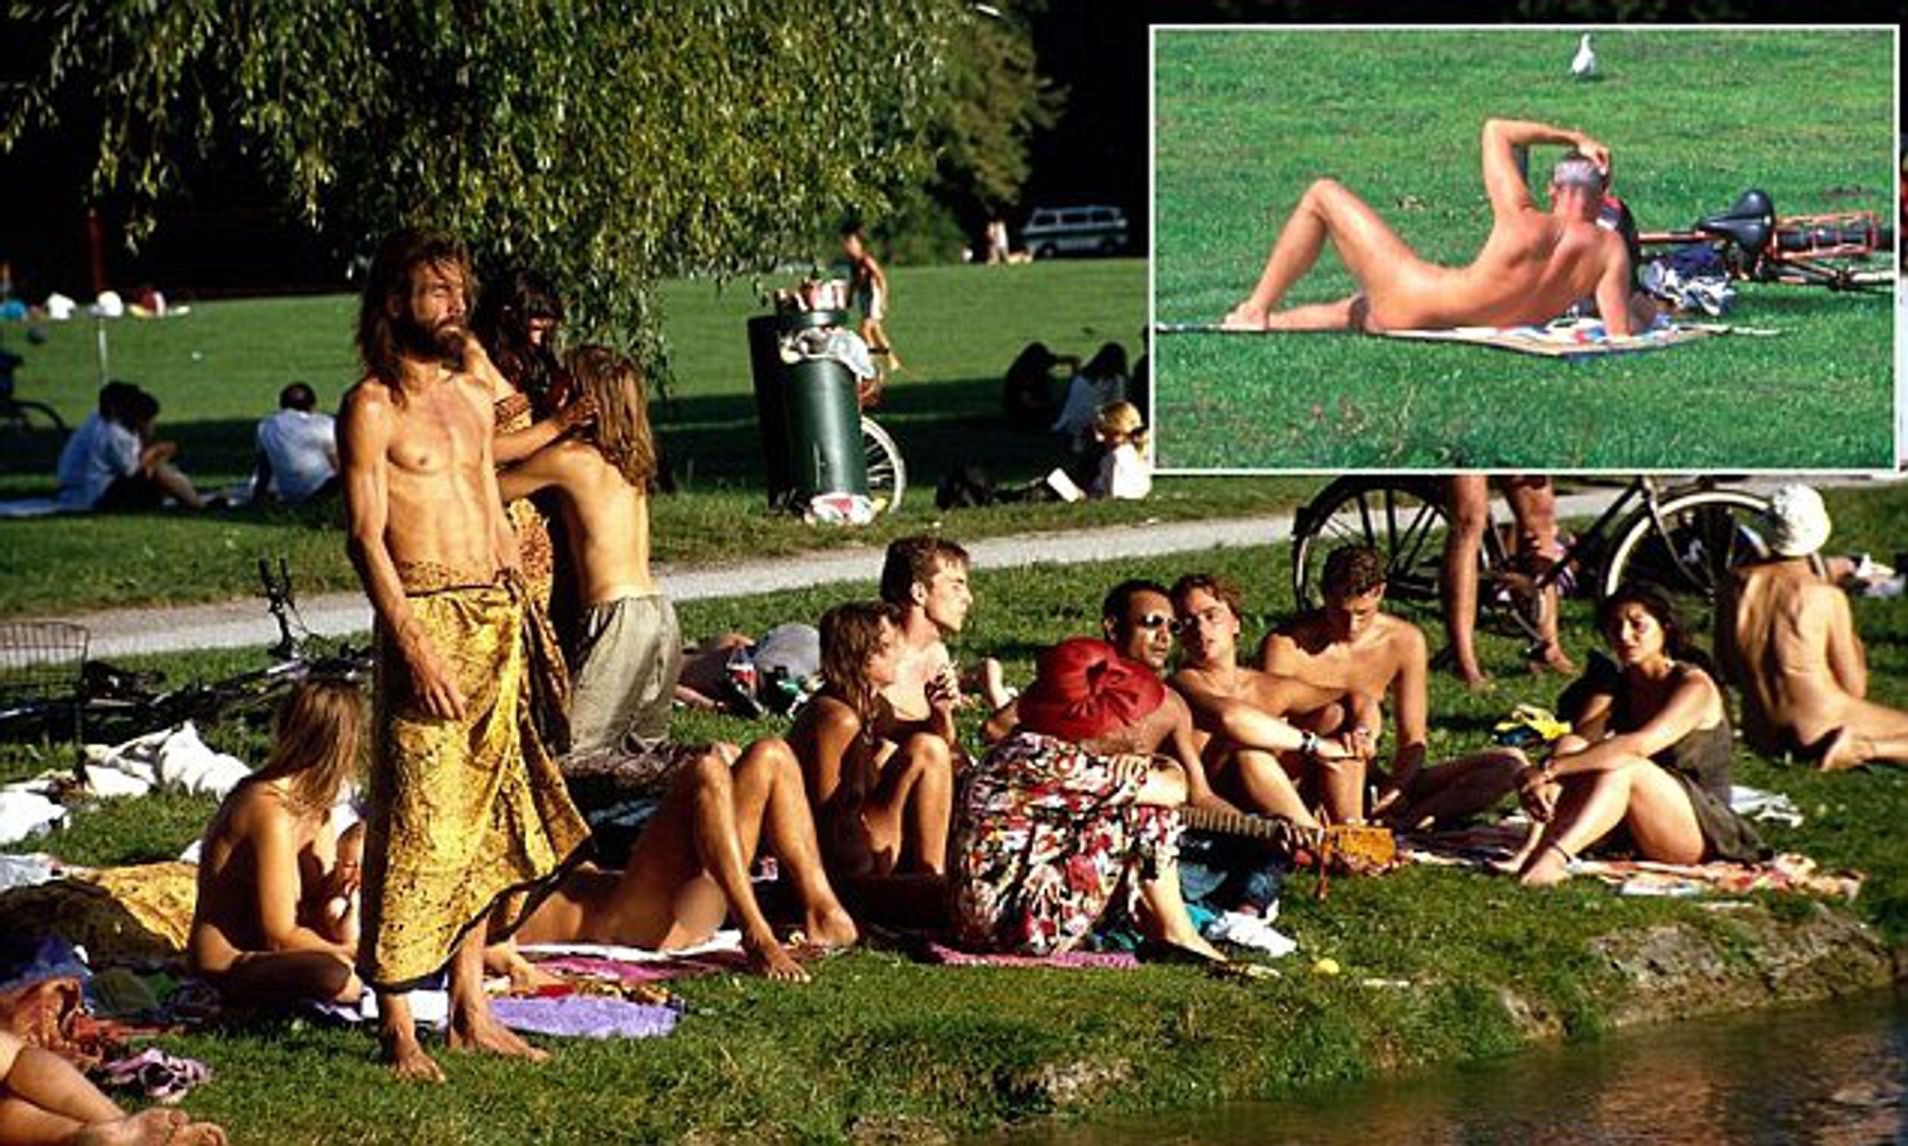 bob leclerc recommends nude in the park pic